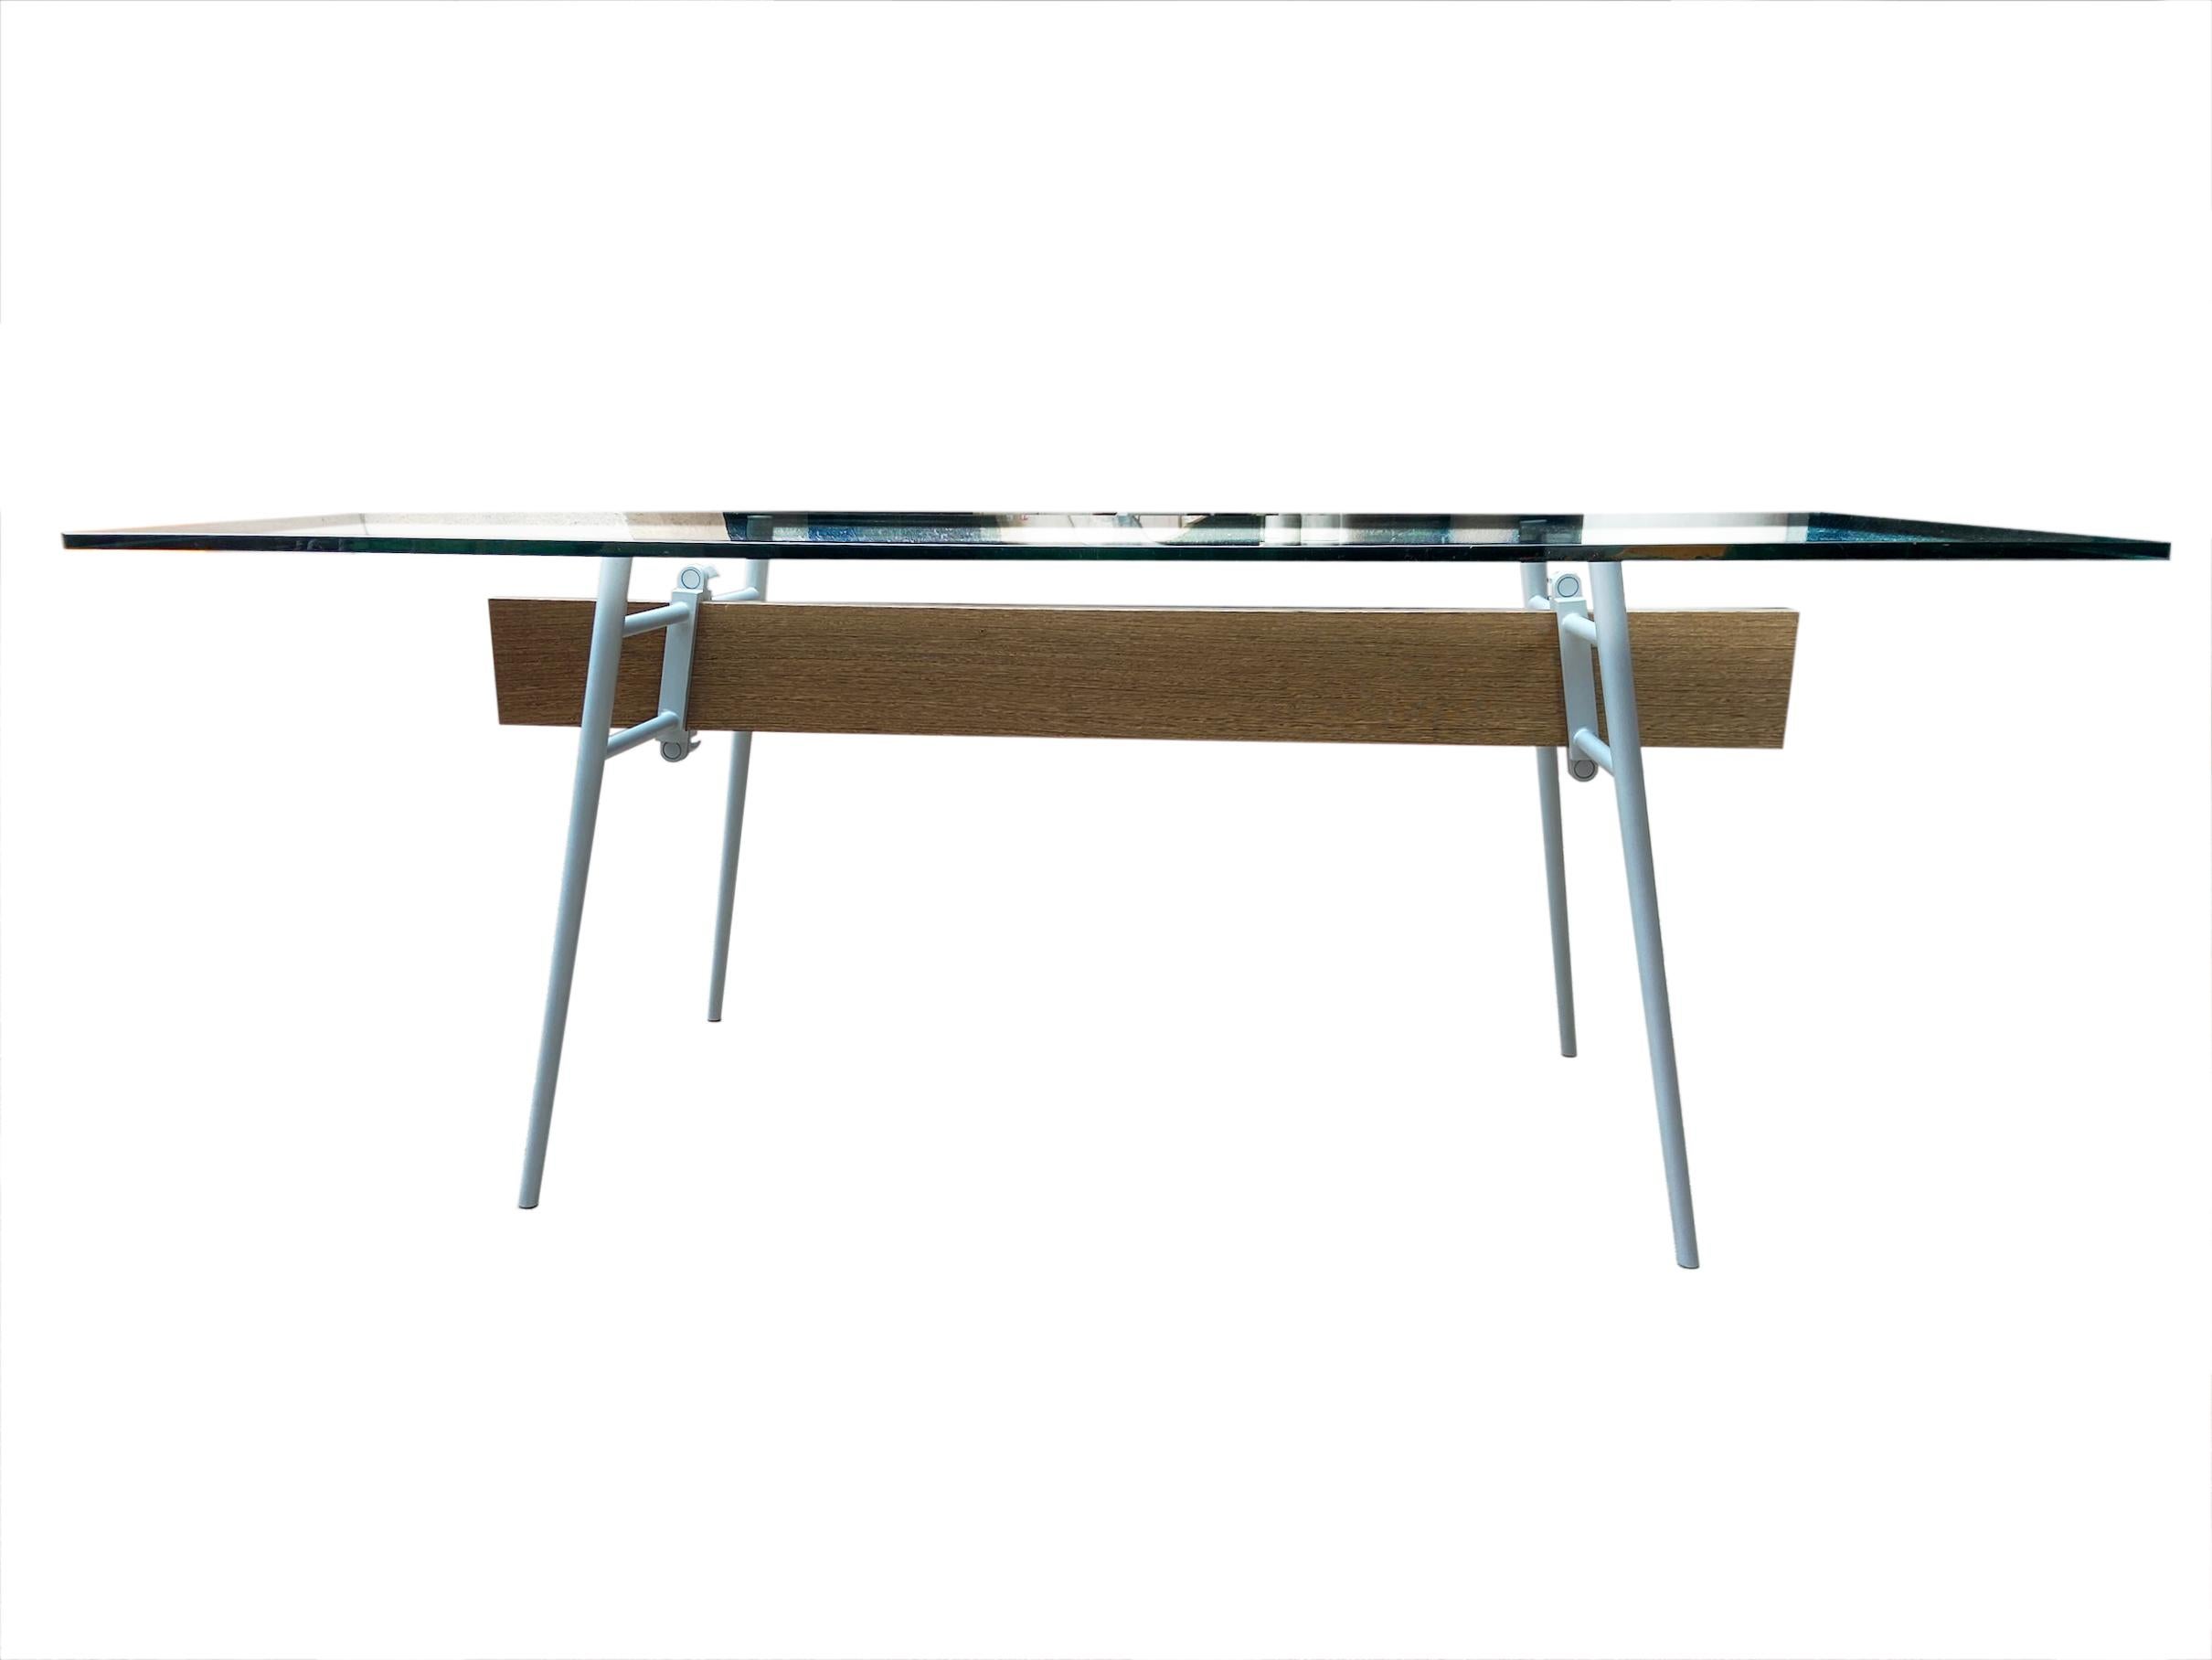 M.T. table Minimum' - Philippe Starck 
Edition CASSINA
Circa 2010
Wood and glass 
Measures: 72 x 210 x 85 cm
2400€.